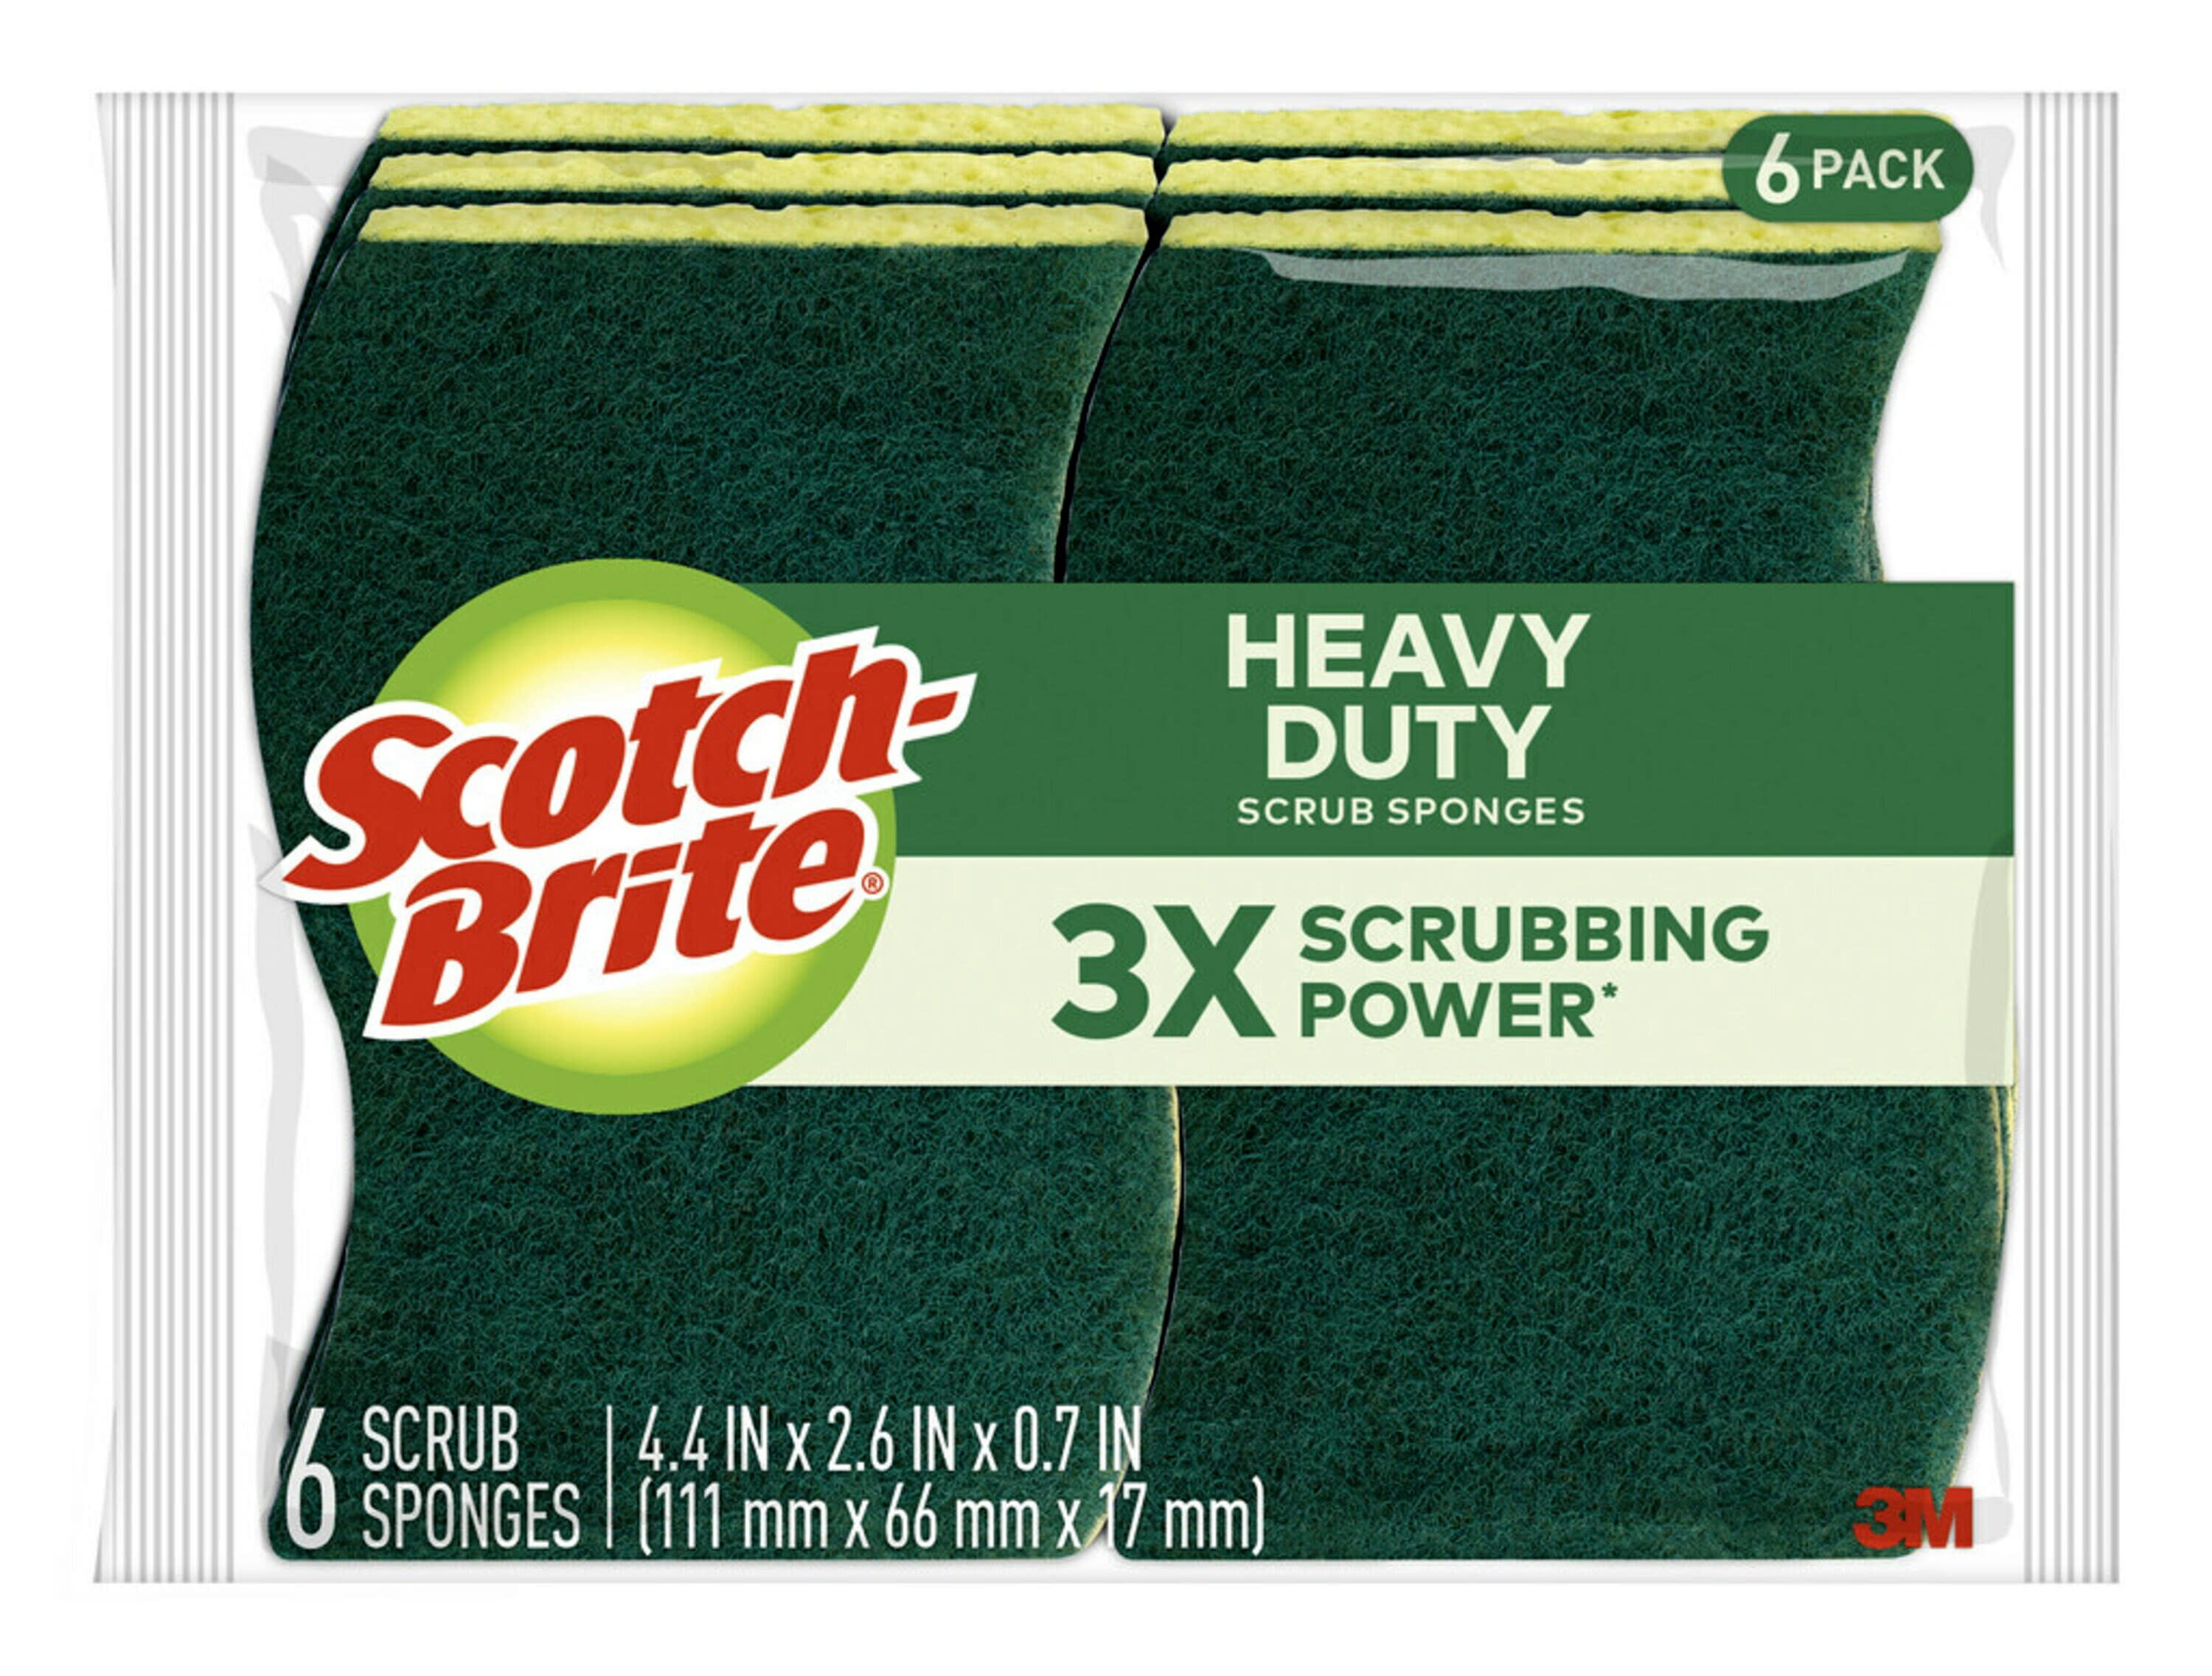  Scotch-Brite Heavy Duty Scrub Sponges, For Washing Dishes and  Cleaning Kitchen, 6 Scrub Sponges : Everything Else